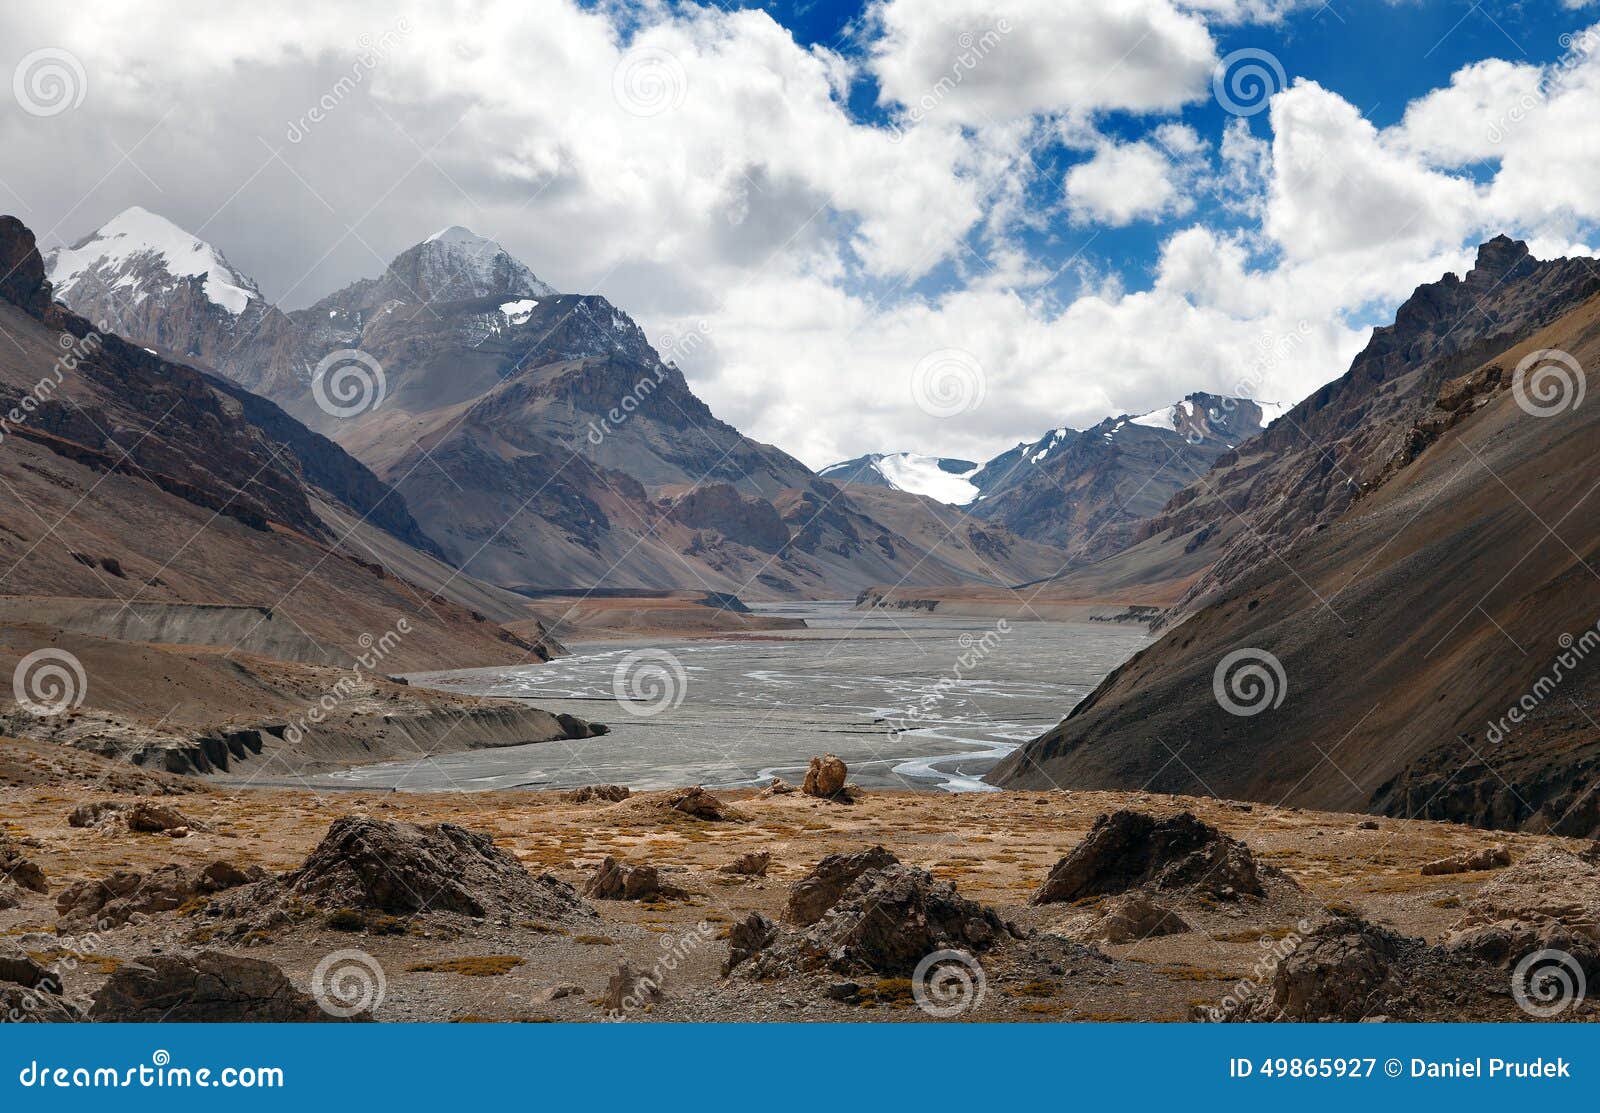 Himalayan Landscape Scenery In Lahaul Valley In Himalayas With Snowcapped  Mountains. Himachal Pradesh, India Stock Photo, Picture and Royalty Free  Image. Image 140584809.